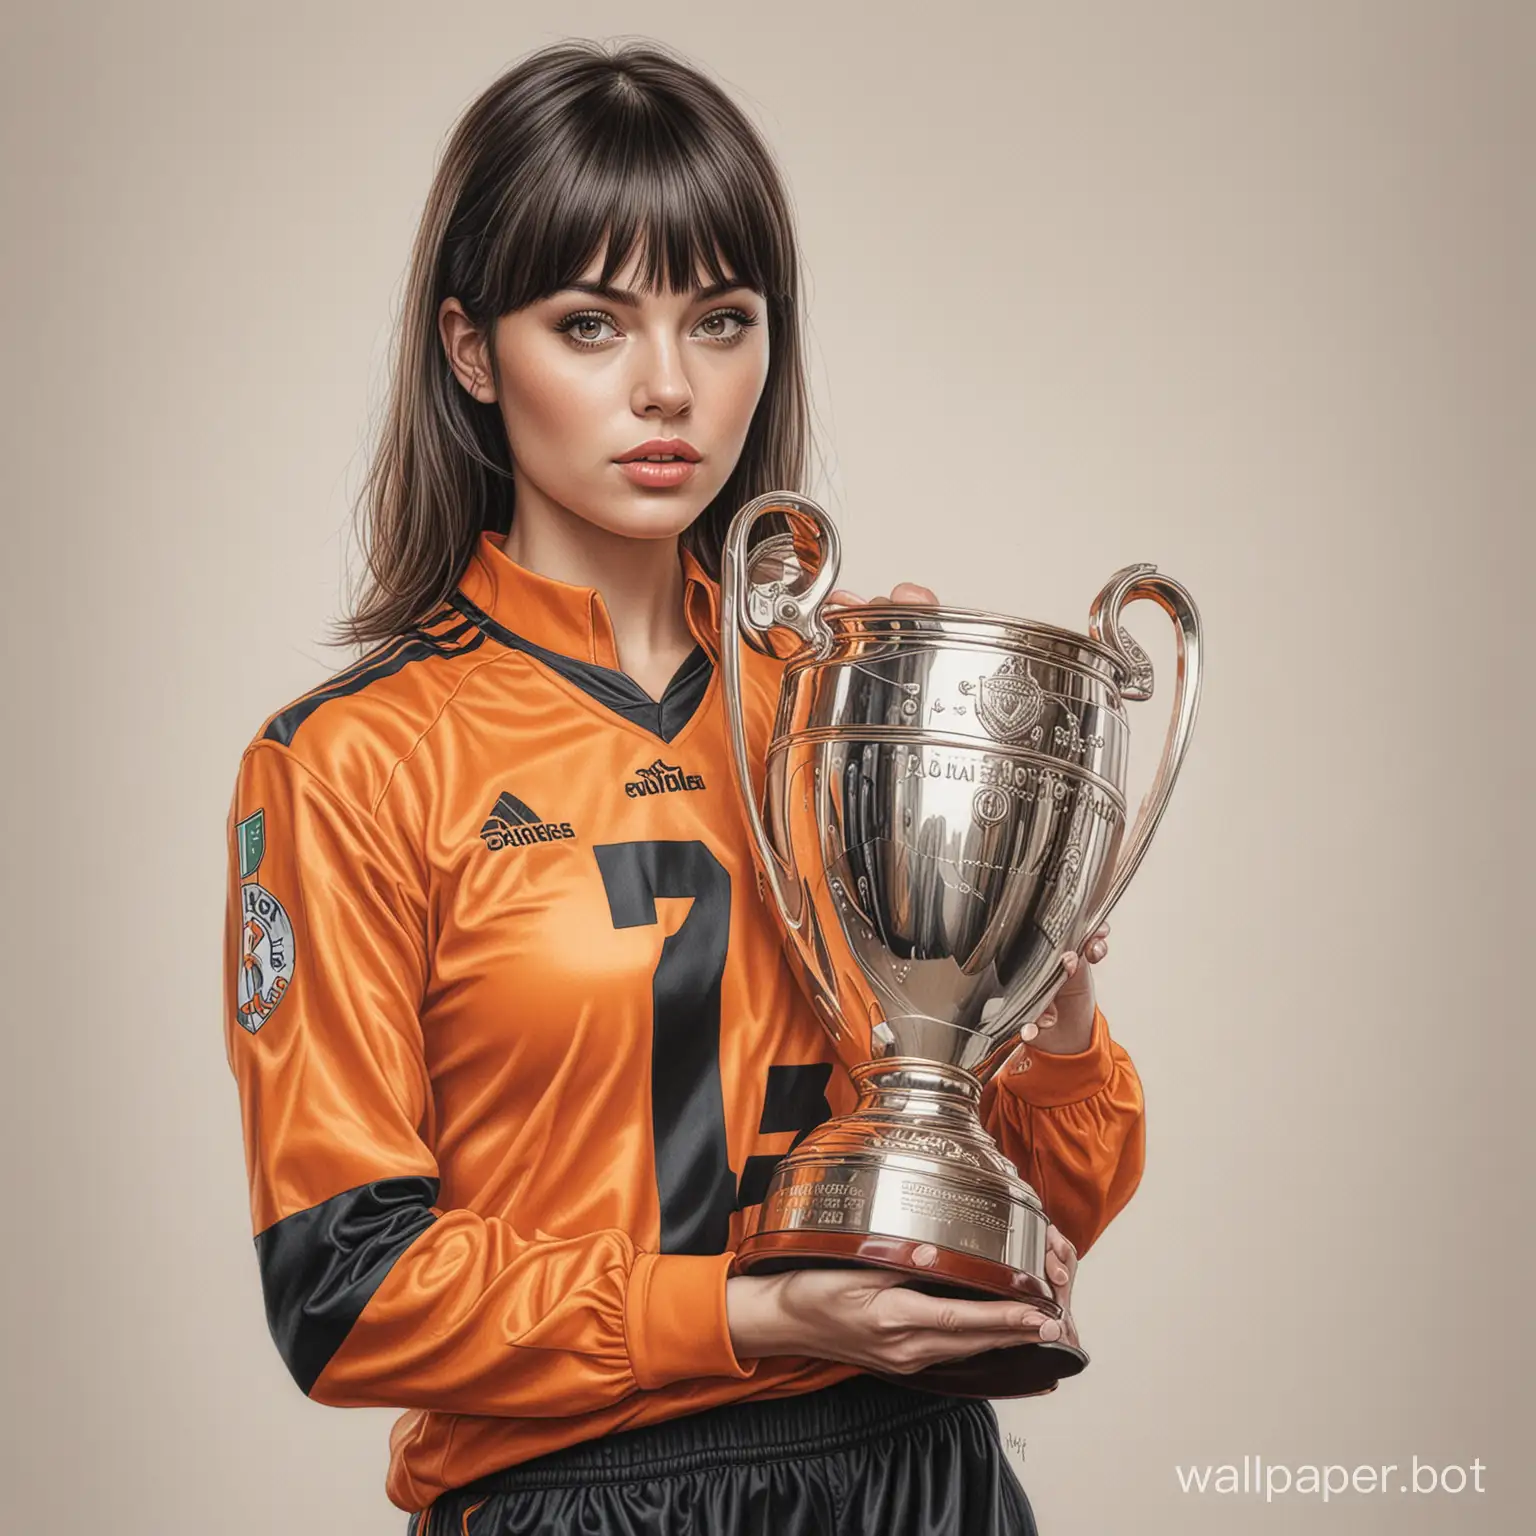 Realistic-Drawing-of-Alina-Lanina-Holding-Champions-Cup-in-Football-Uniform